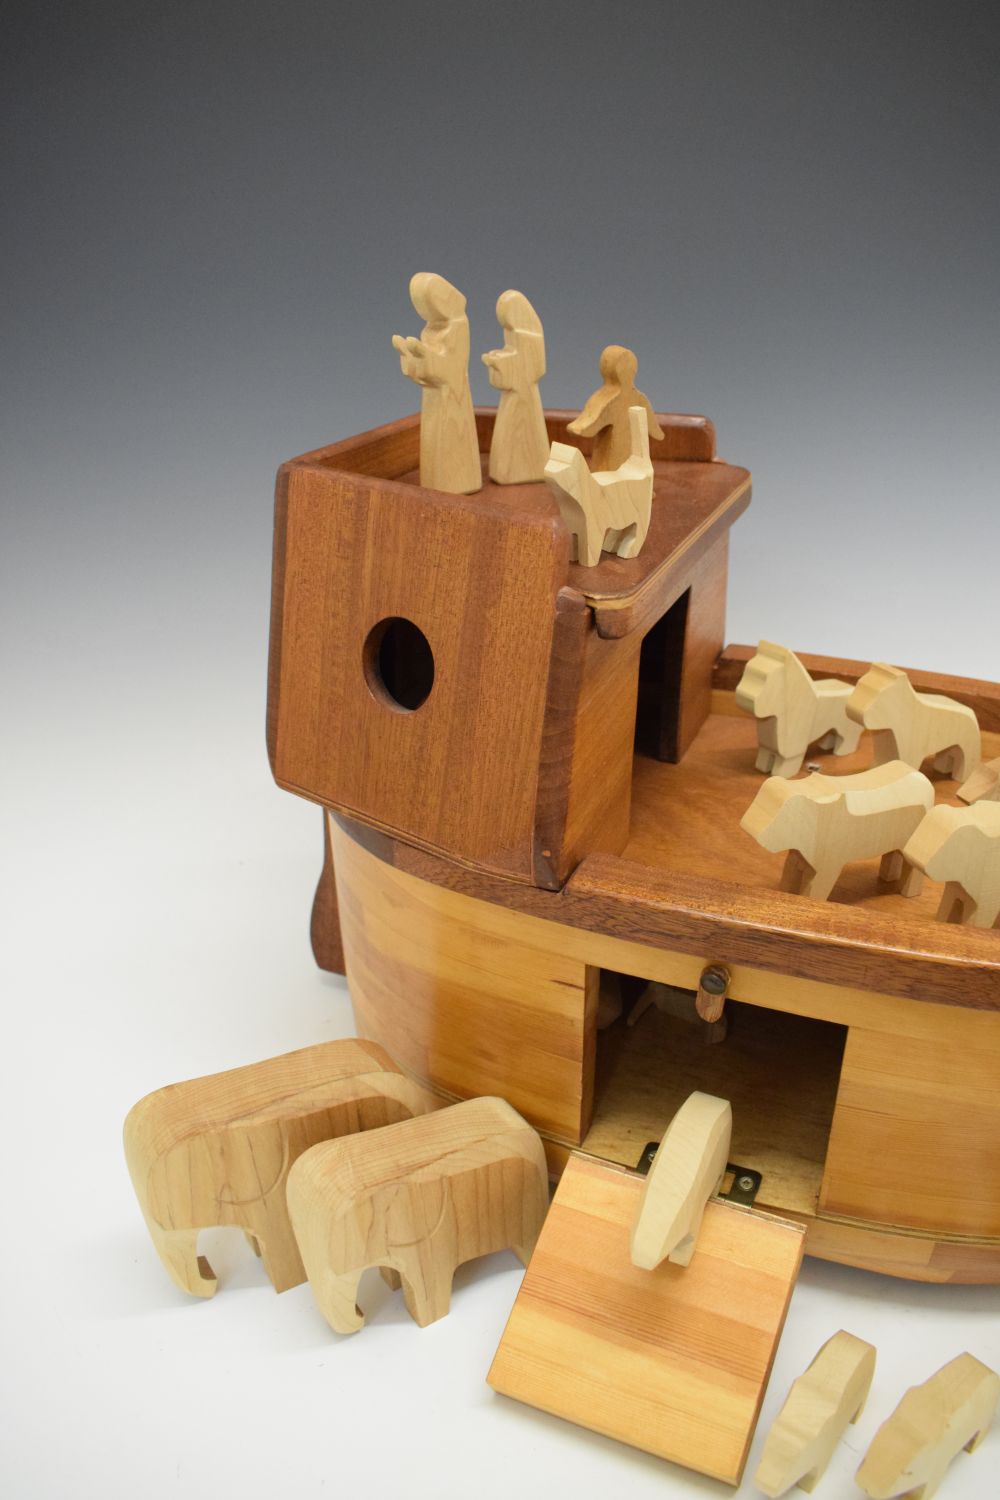 Scratch built pine and mahogany pull-along Noah's Ark with animals, 50cm long - Image 4 of 5